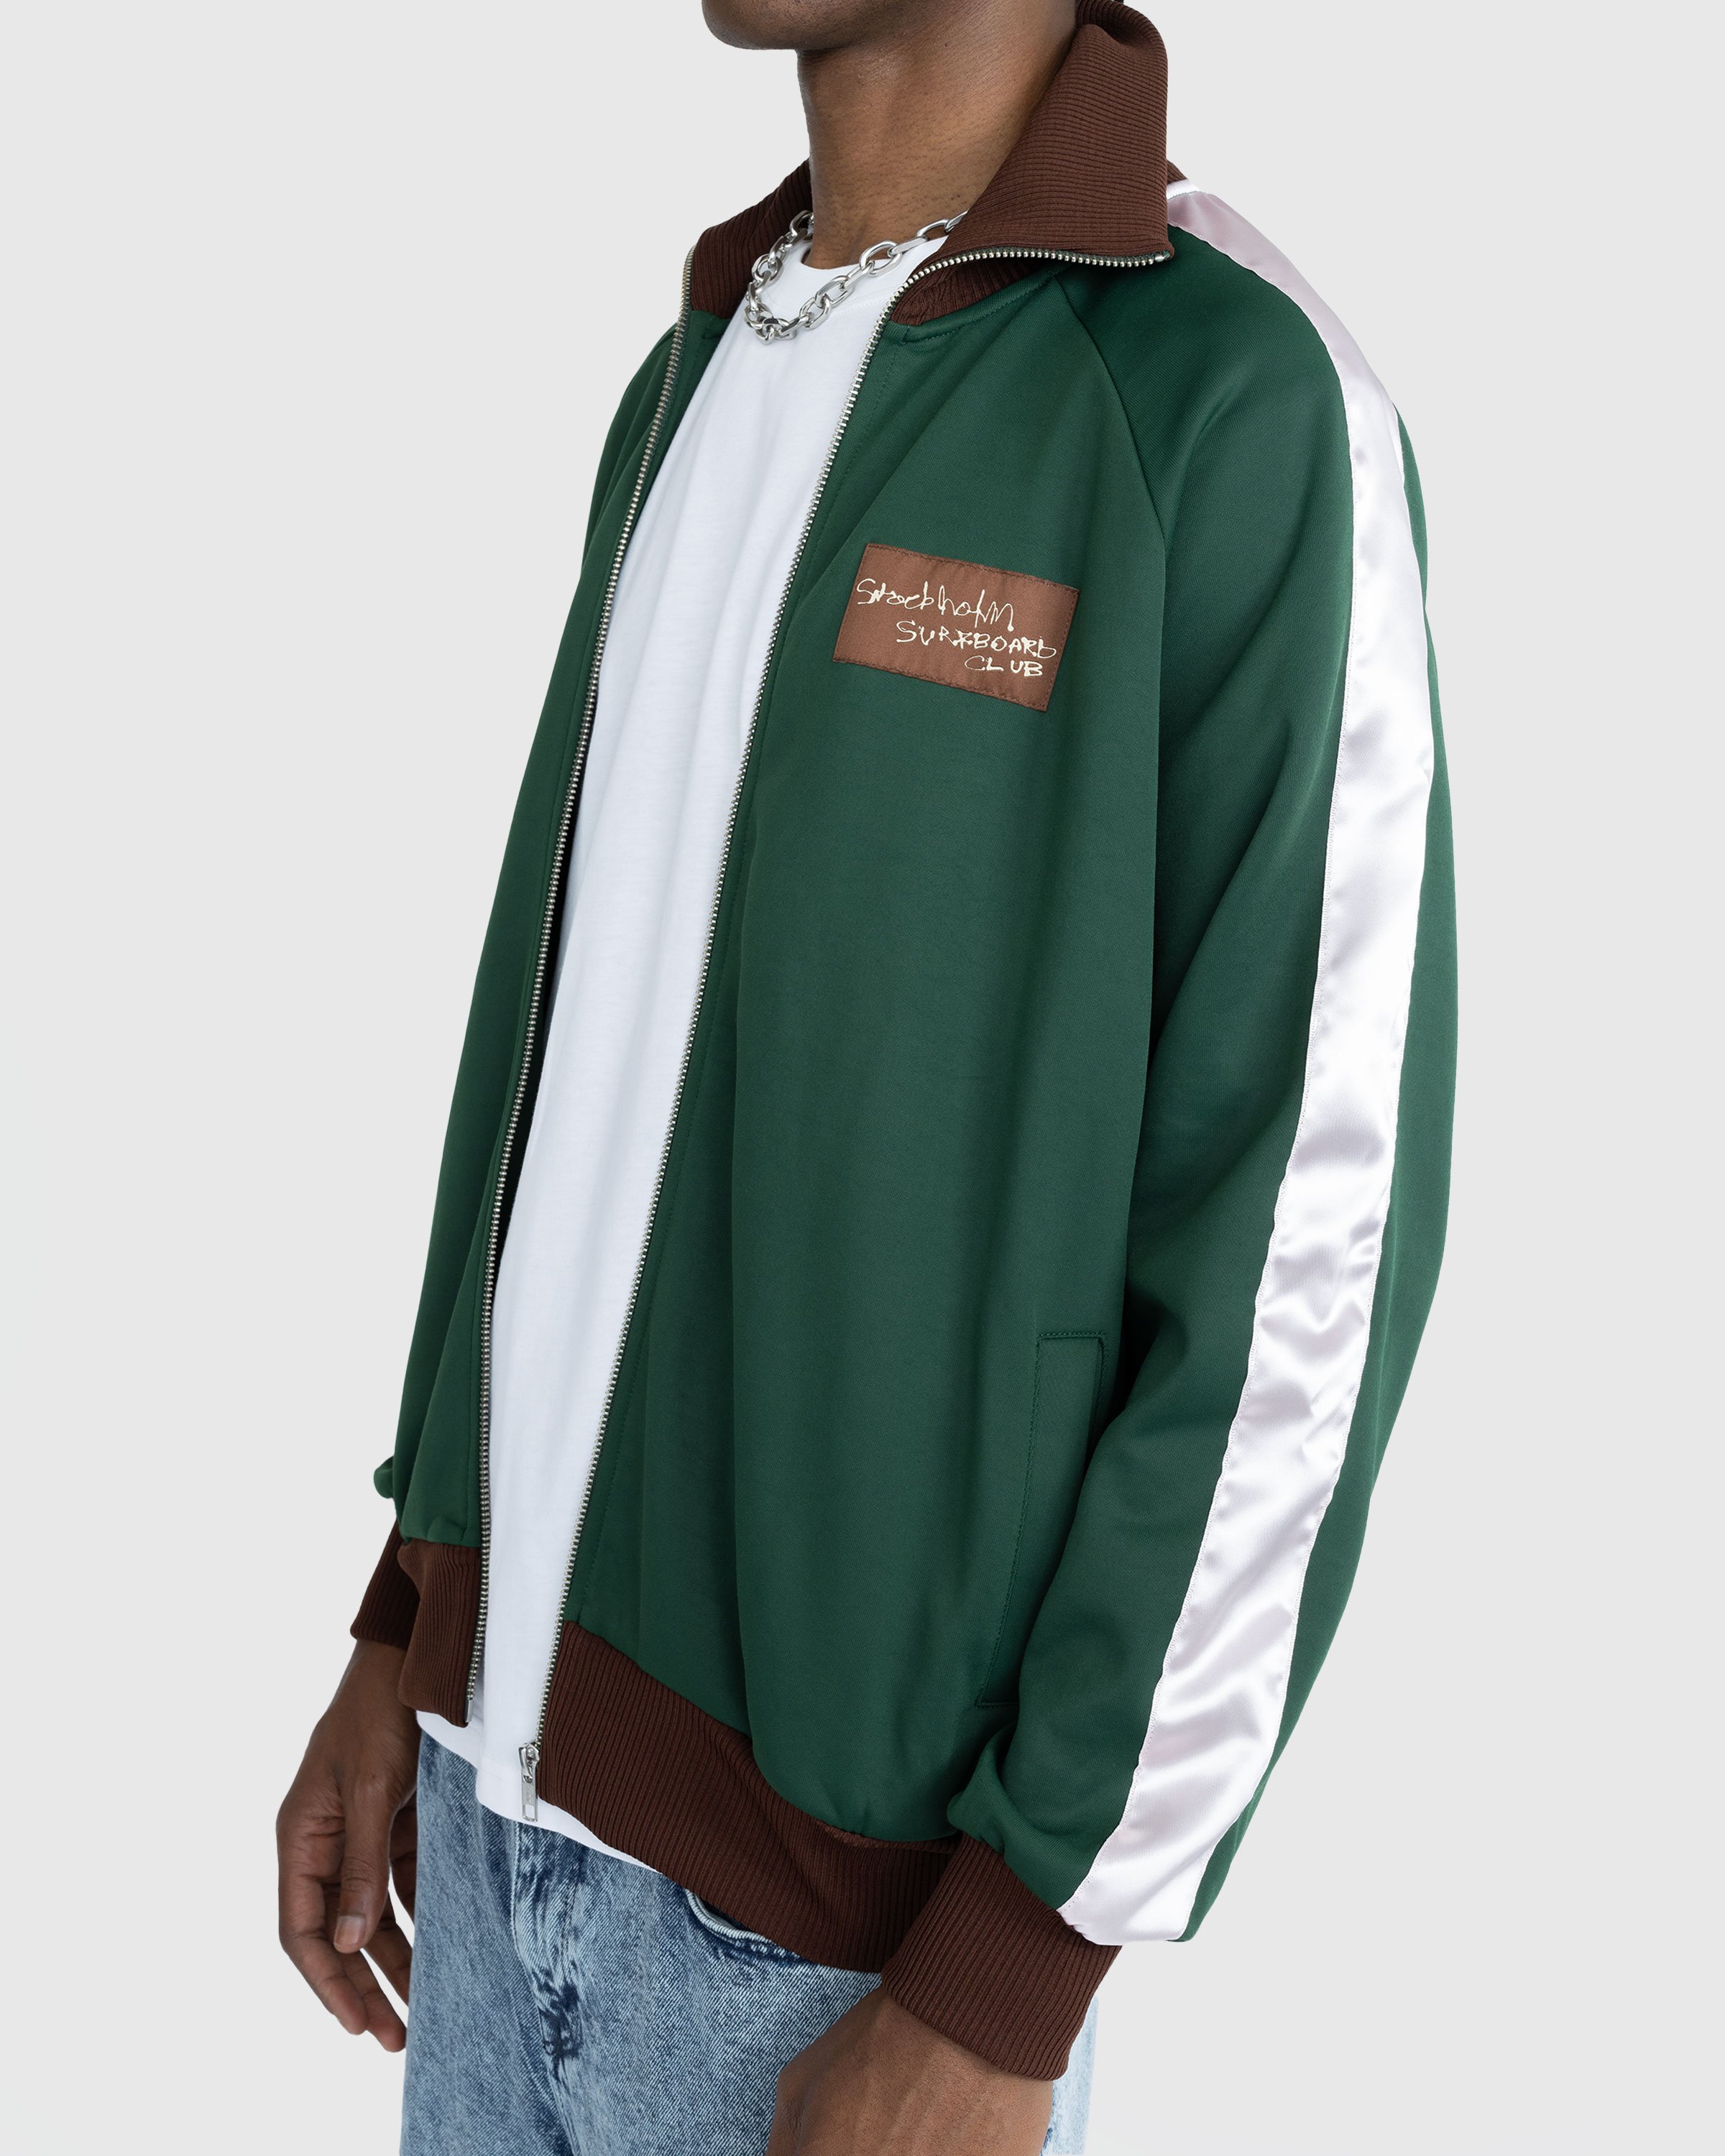 Stockholm Surfboard Club - Track Top Fall Green - Clothing - Green - Image 4